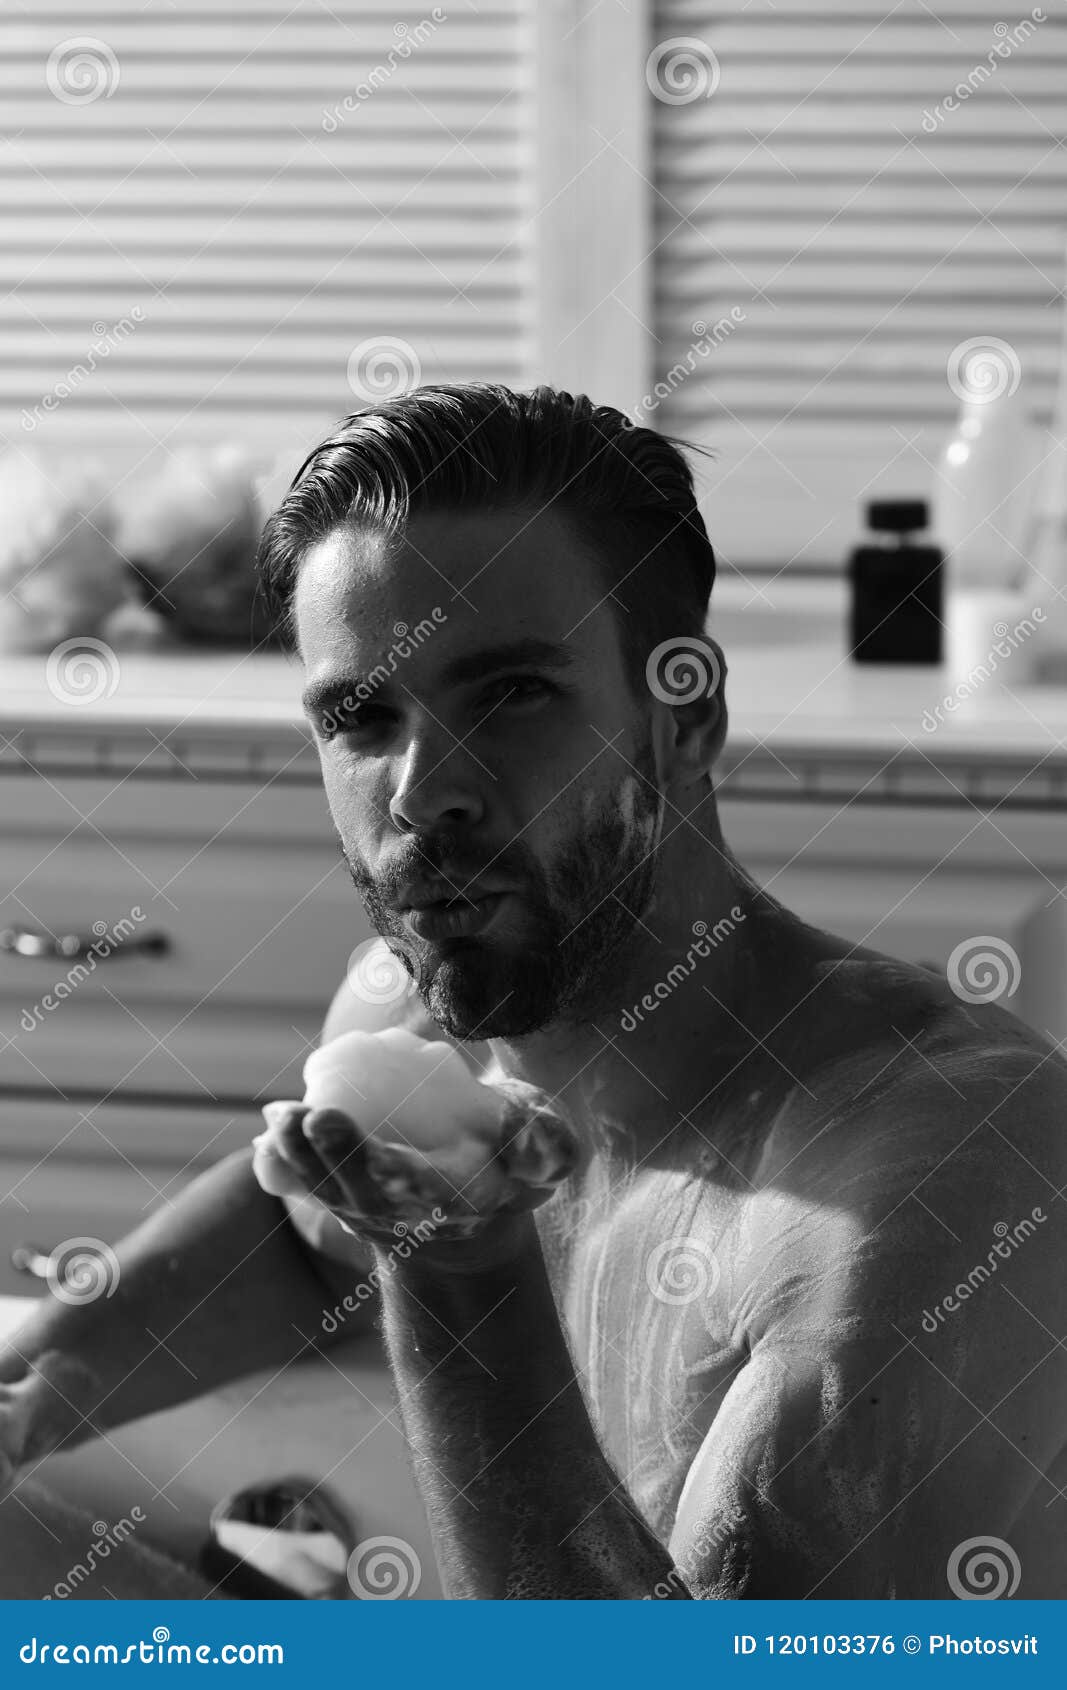 sex and erotica concept. man with beard and seductive face blowing foam from palm. man with beard and seductive face